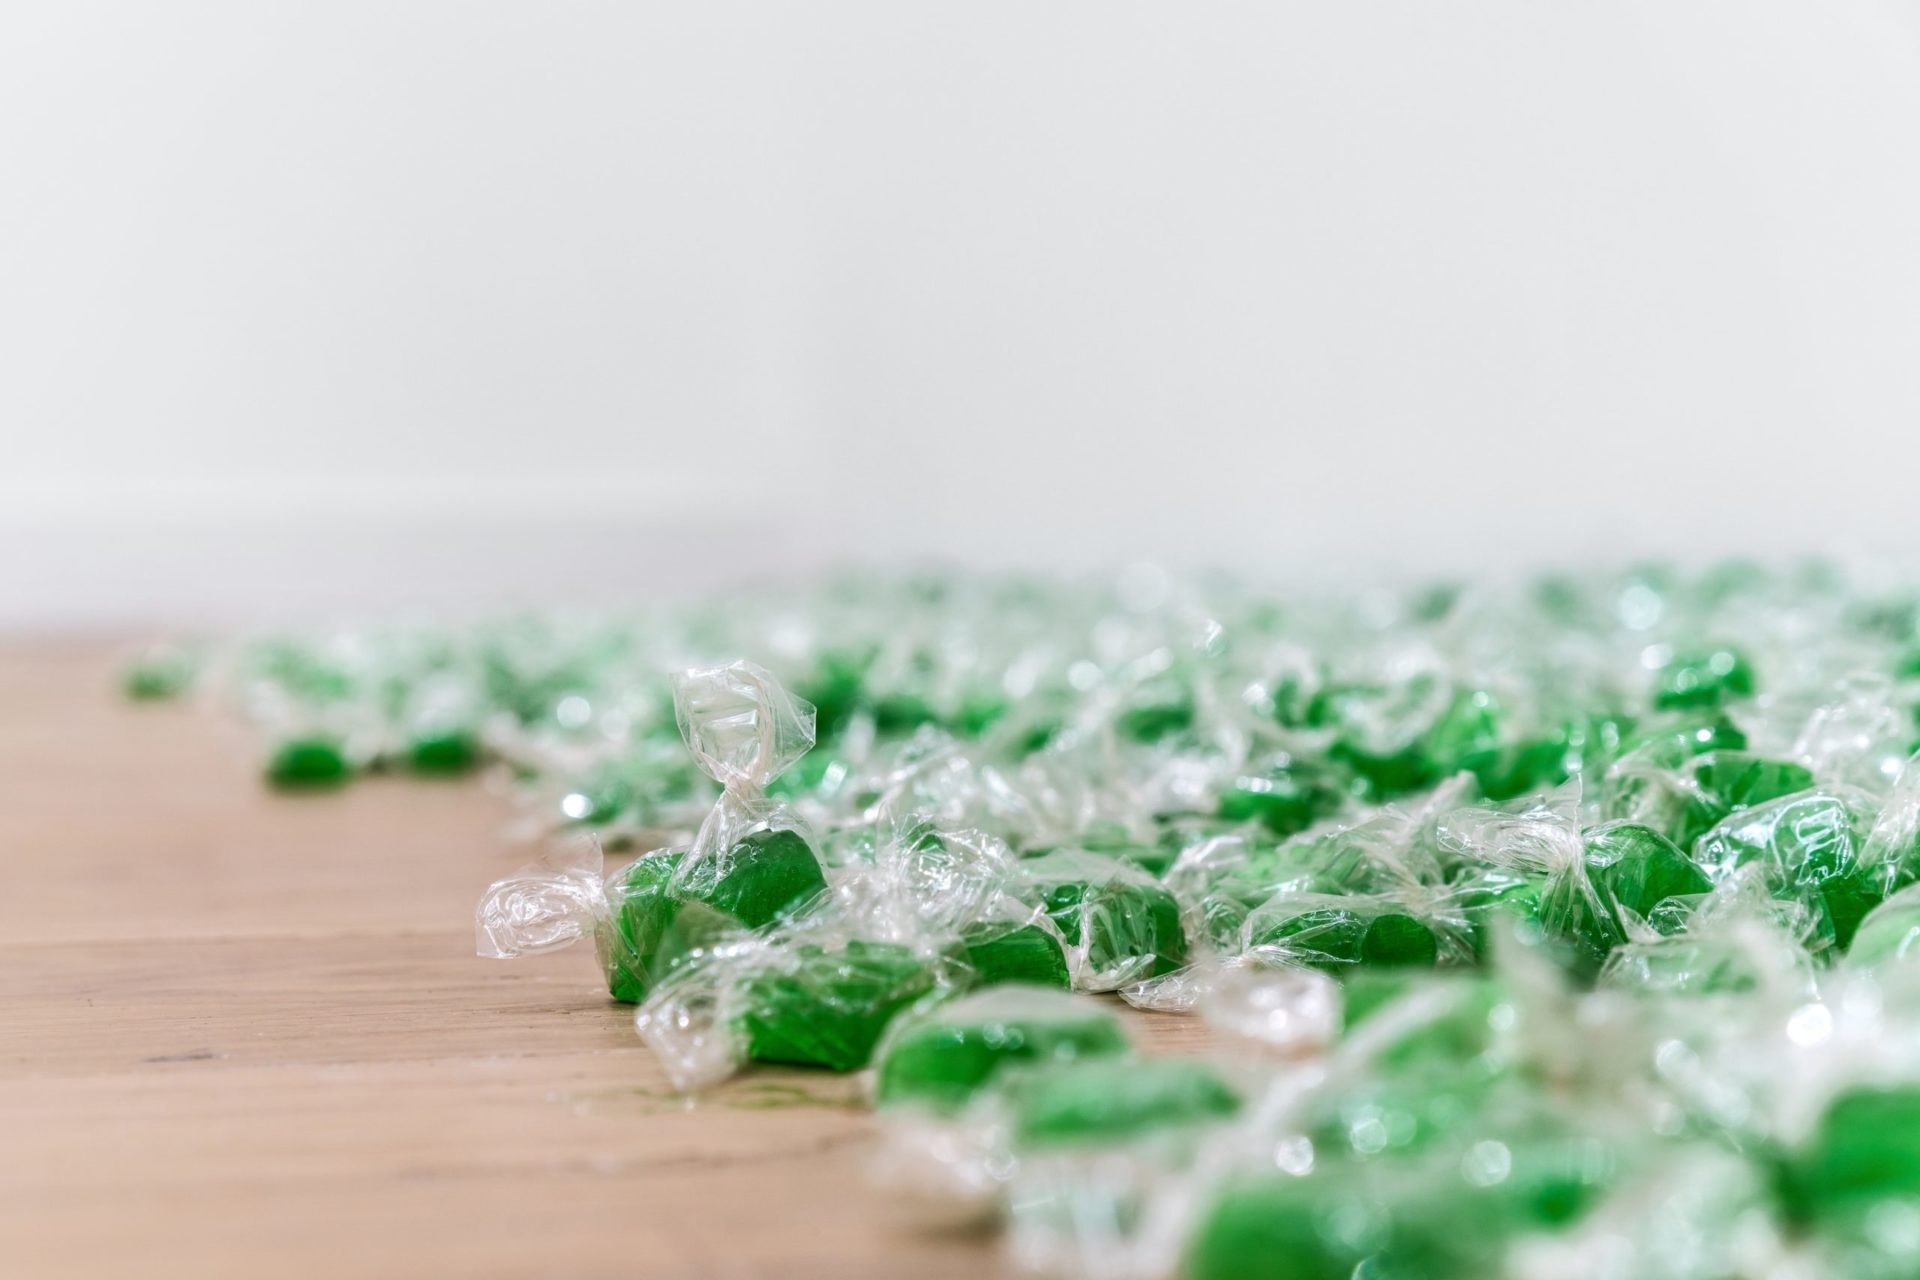 detail photo of wrapped green candies